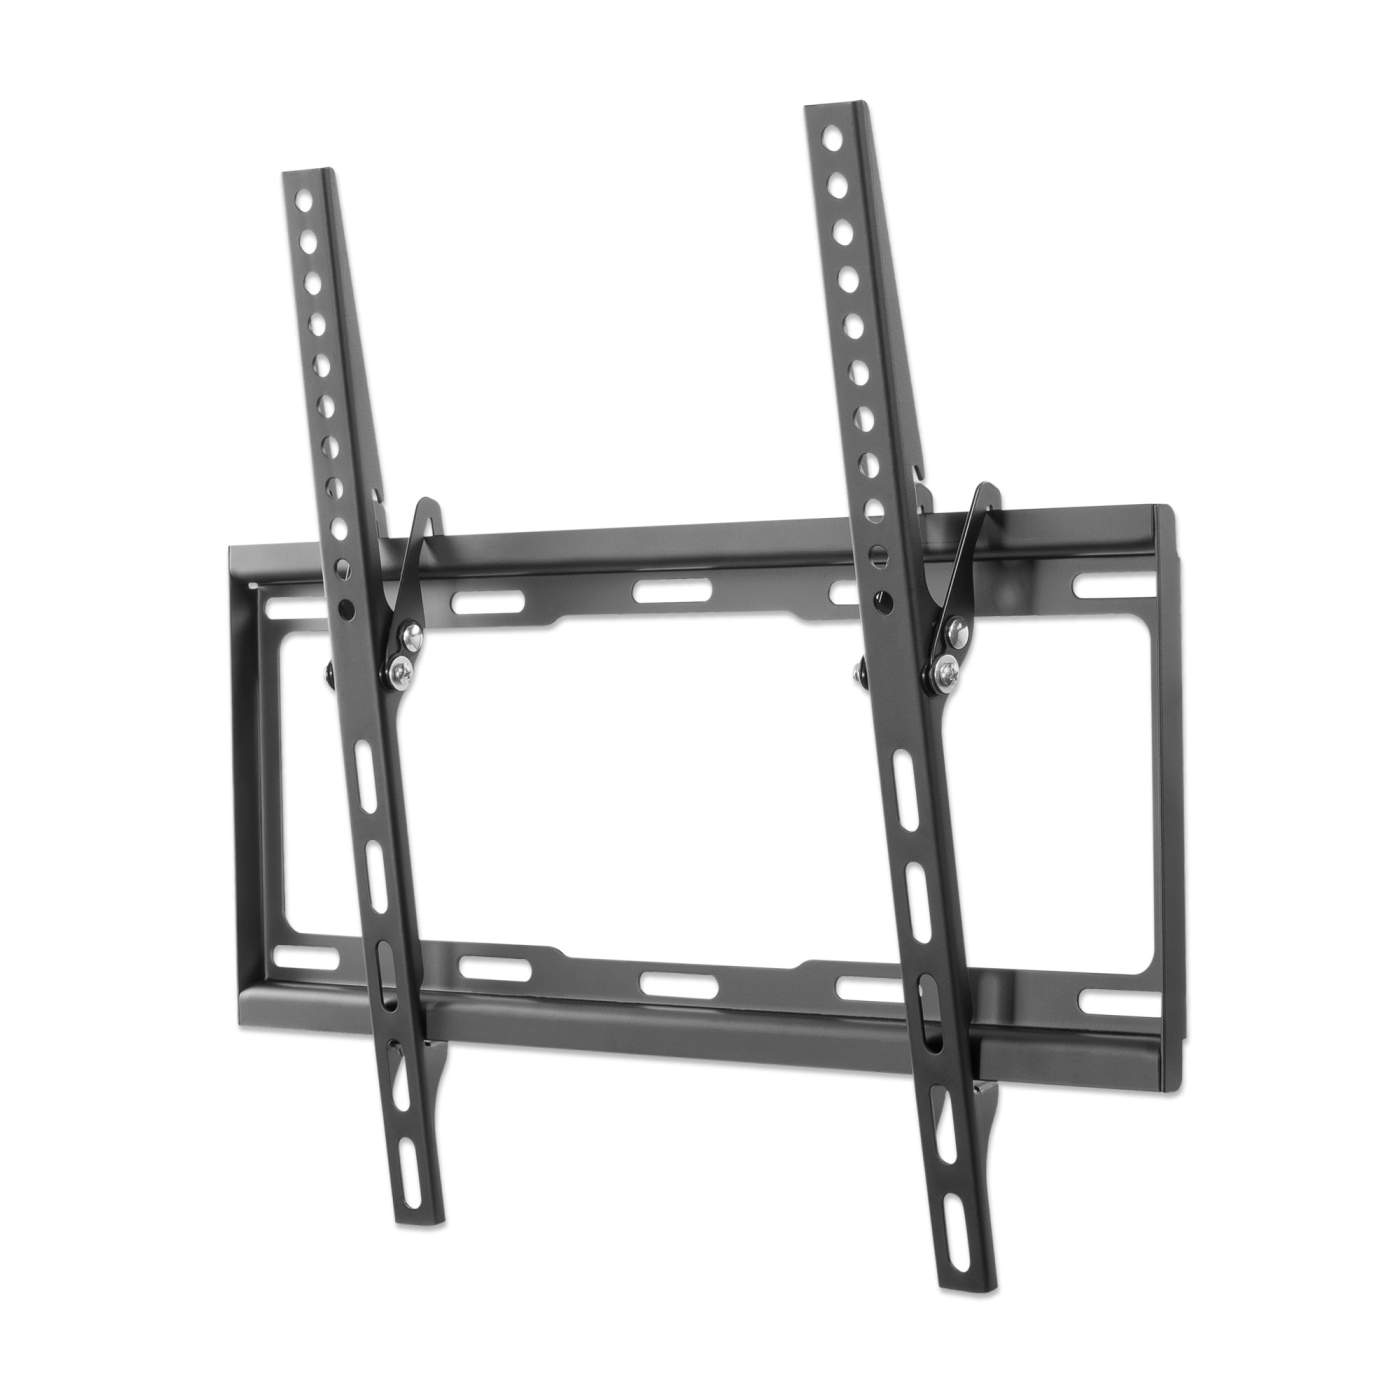 Low-Profile Tilting TV Wall Mount Image 1